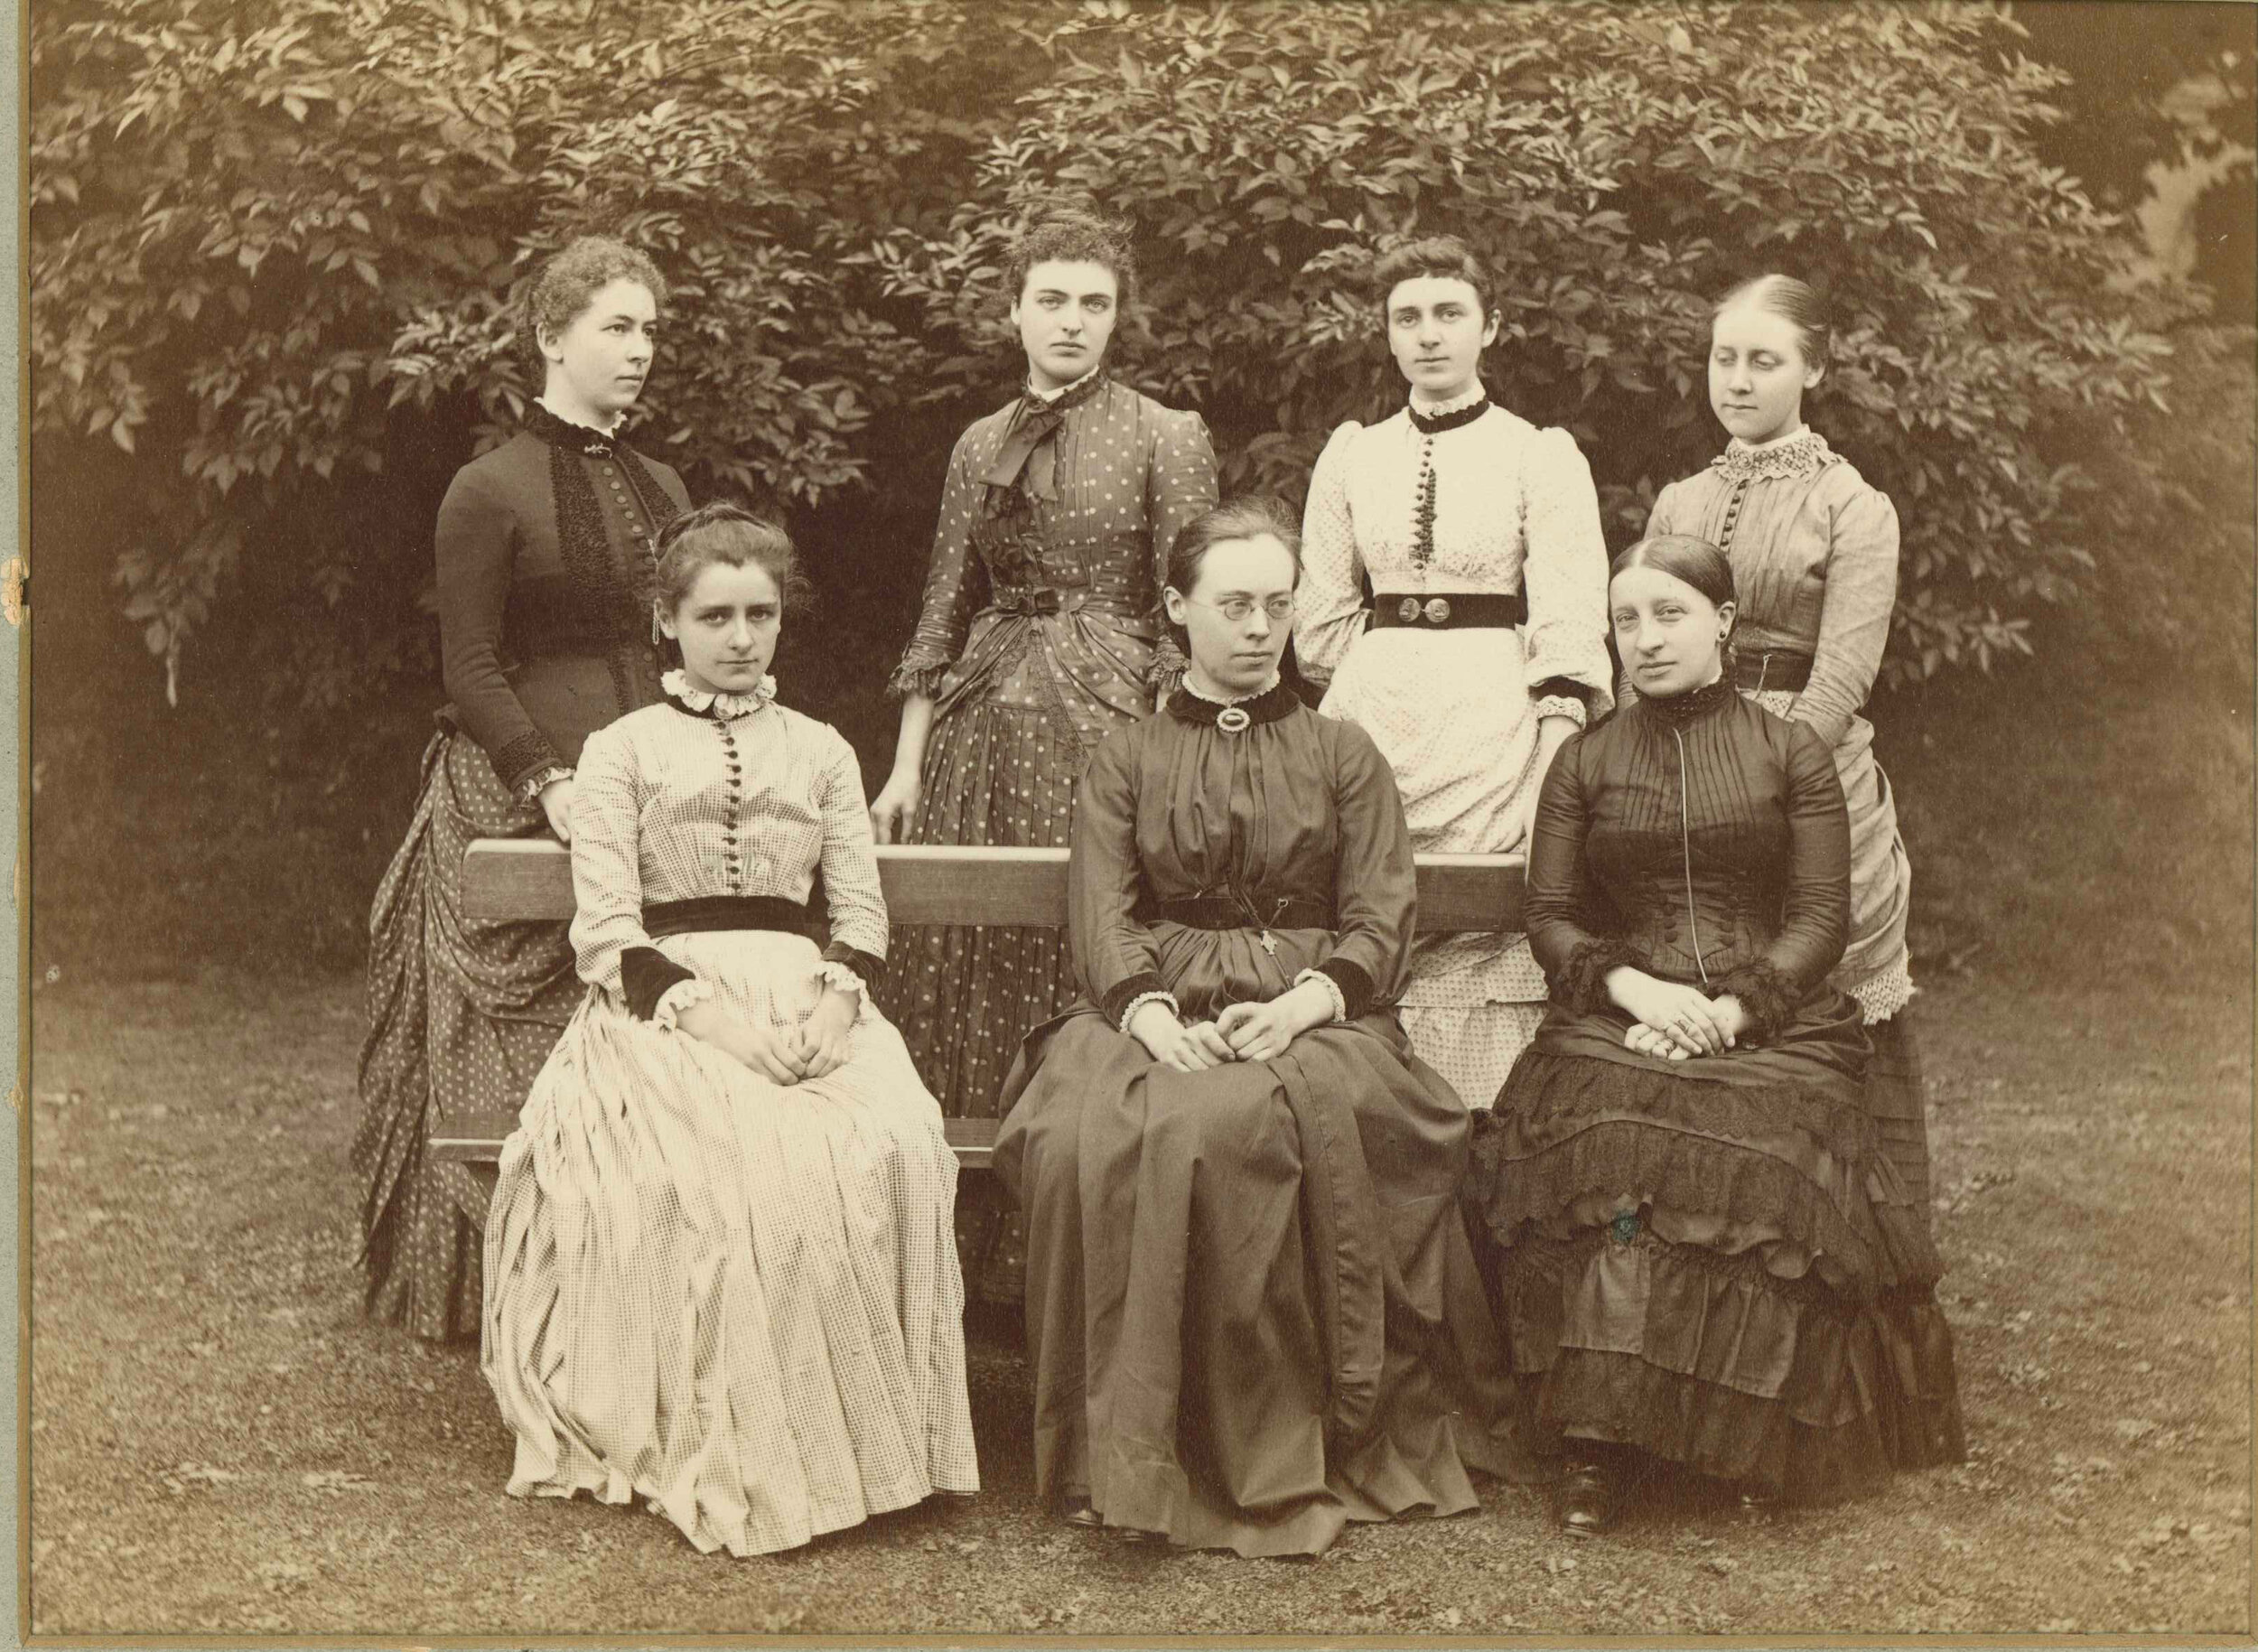  Miss Mowbray, the second headmistress, and her staff in 1886 